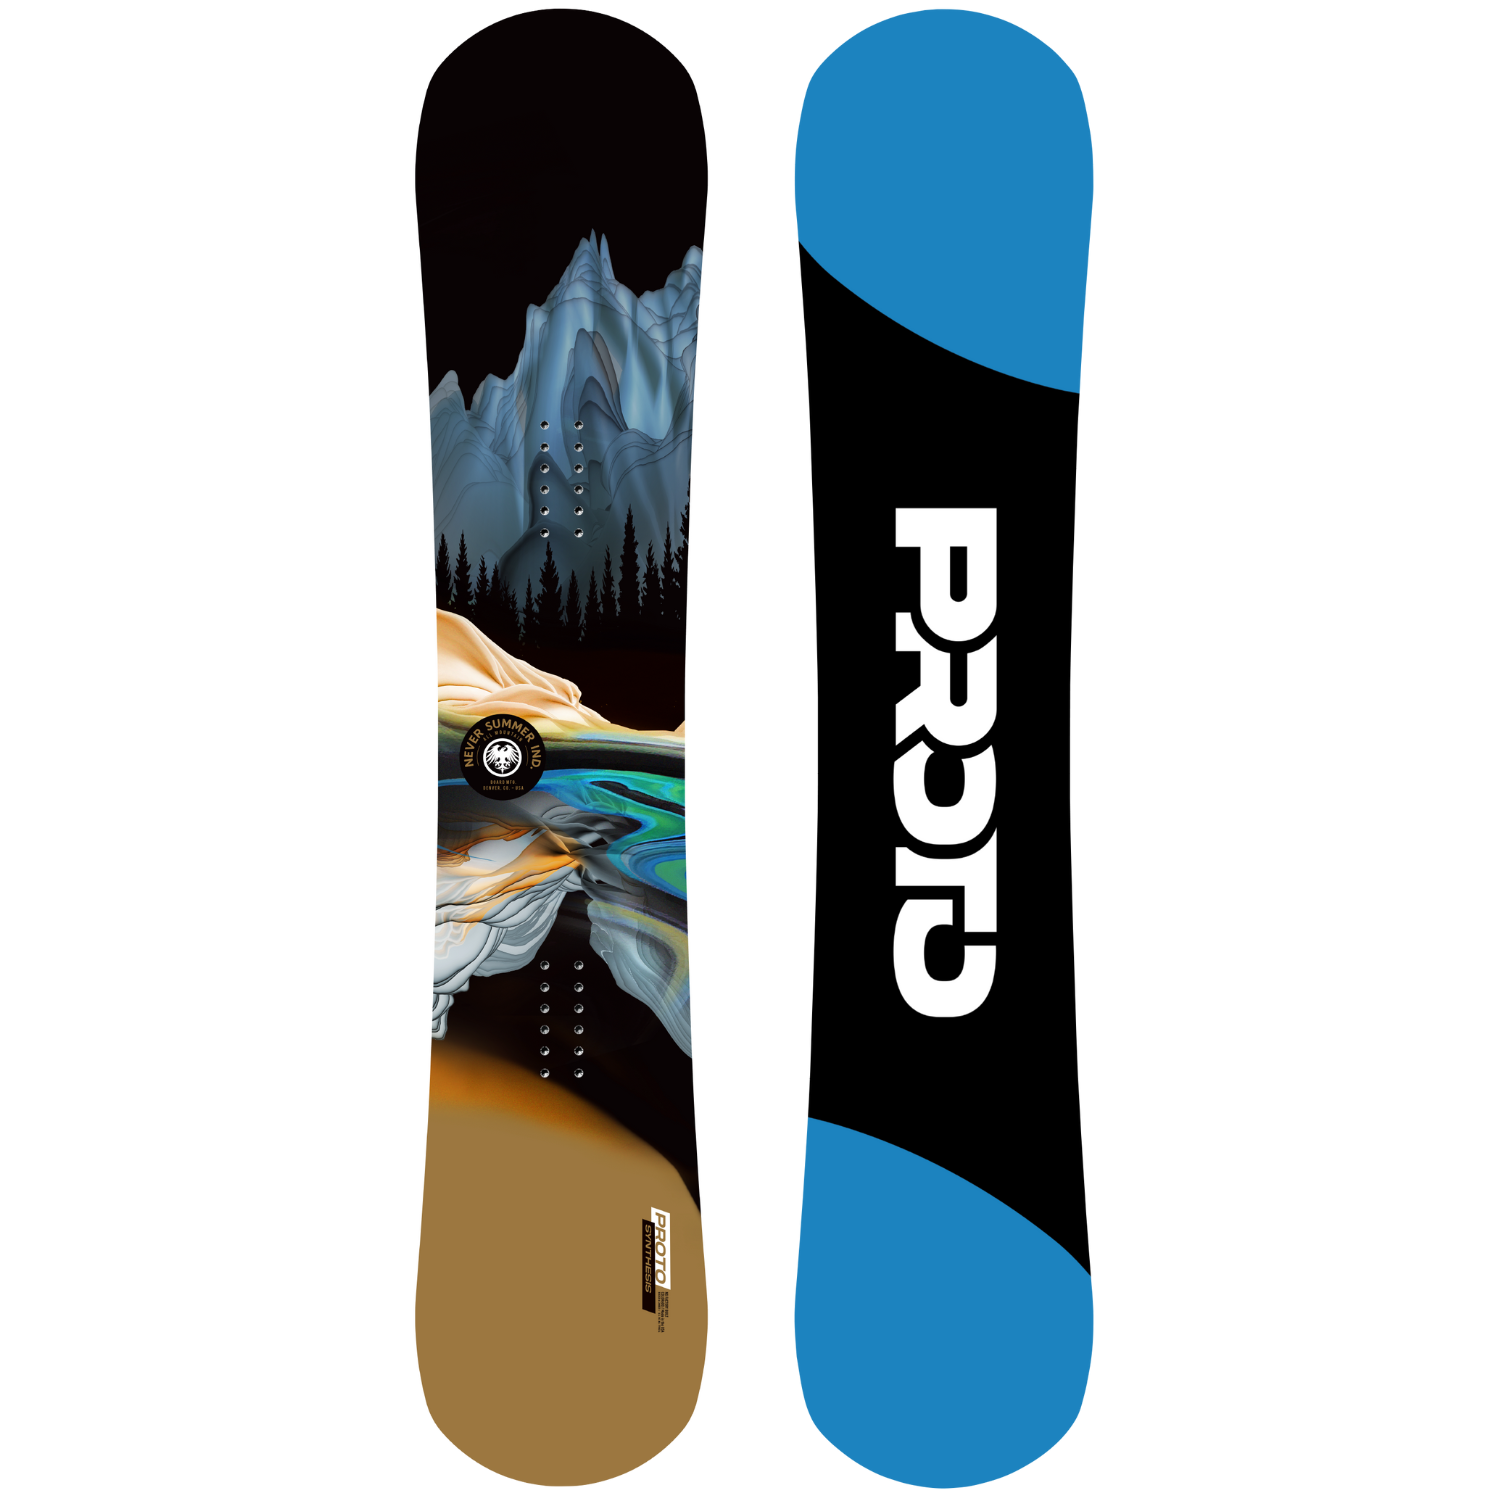 never summer proto synthesis snowboard